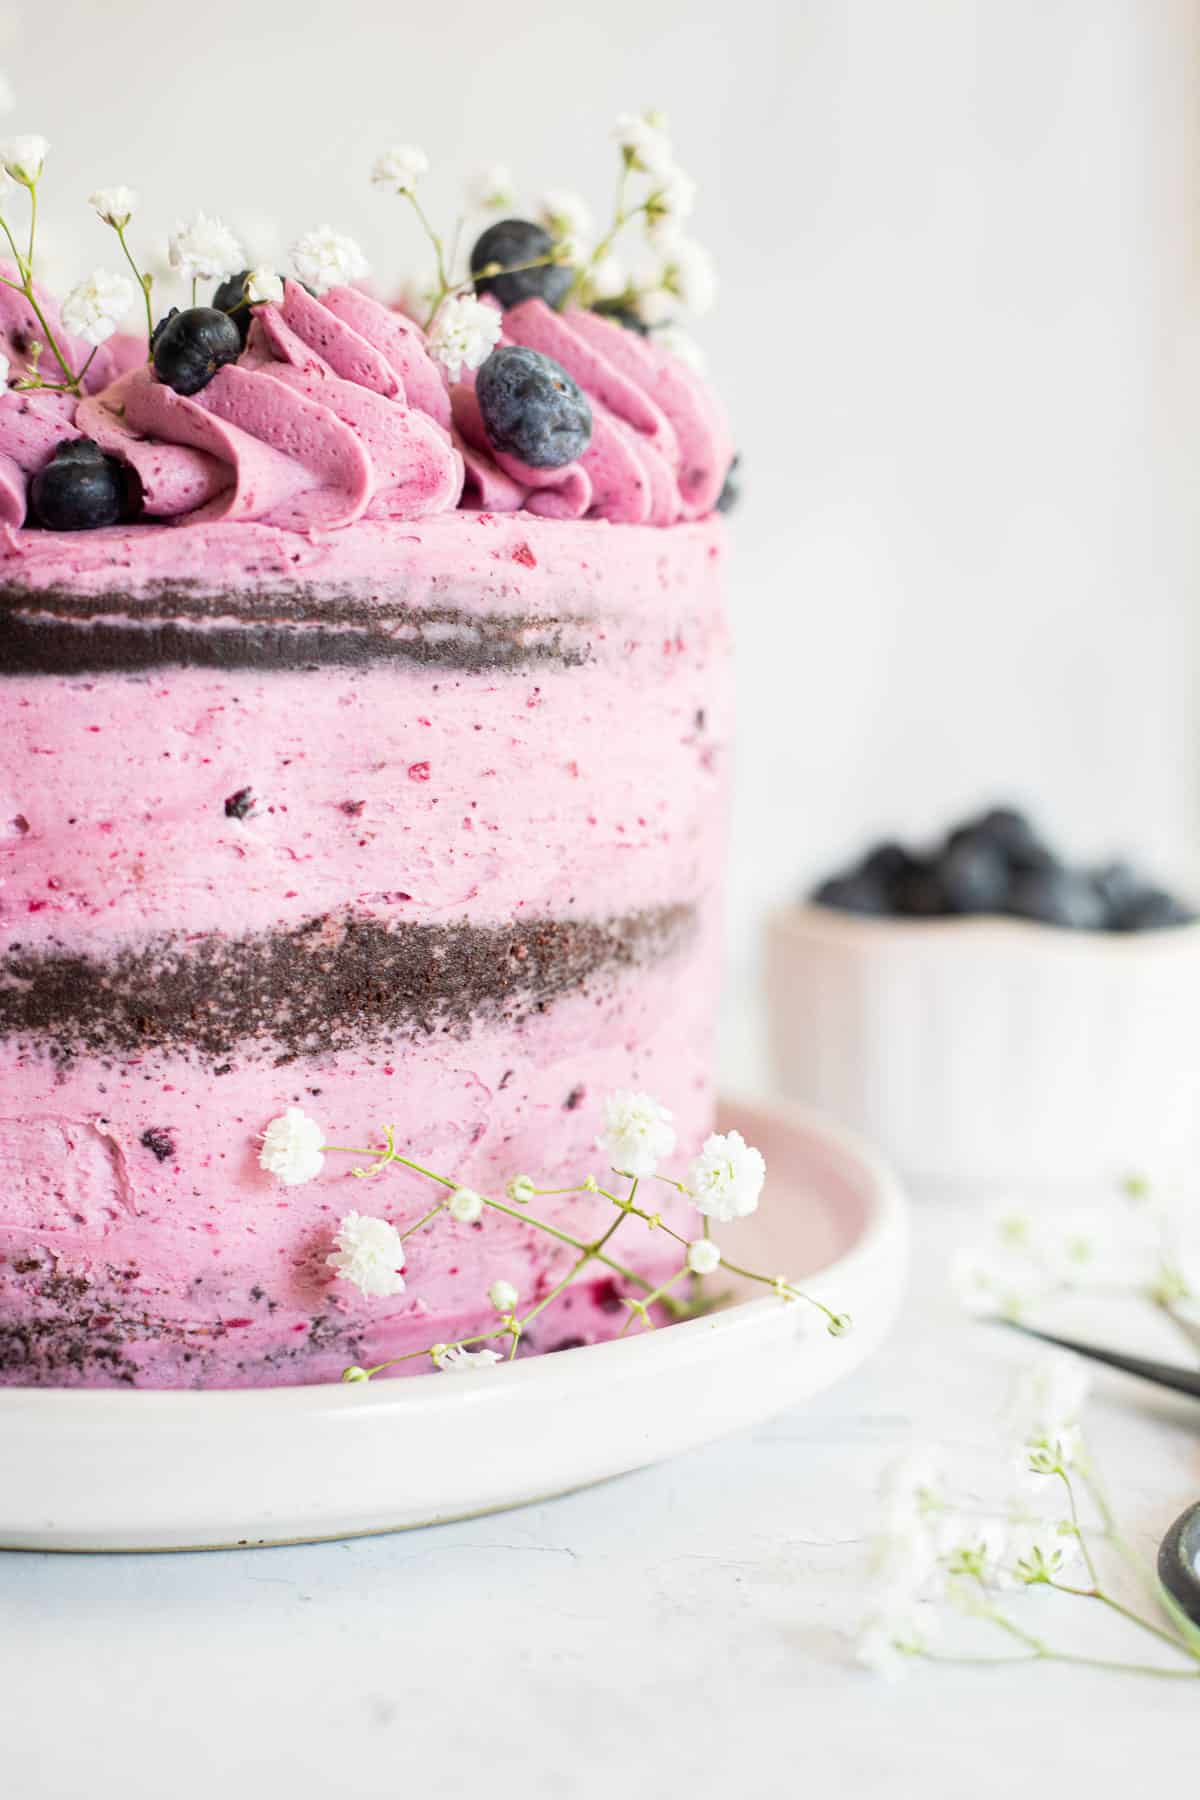 half of a chocolate blueberry cake with flowers and fresh blueberries.